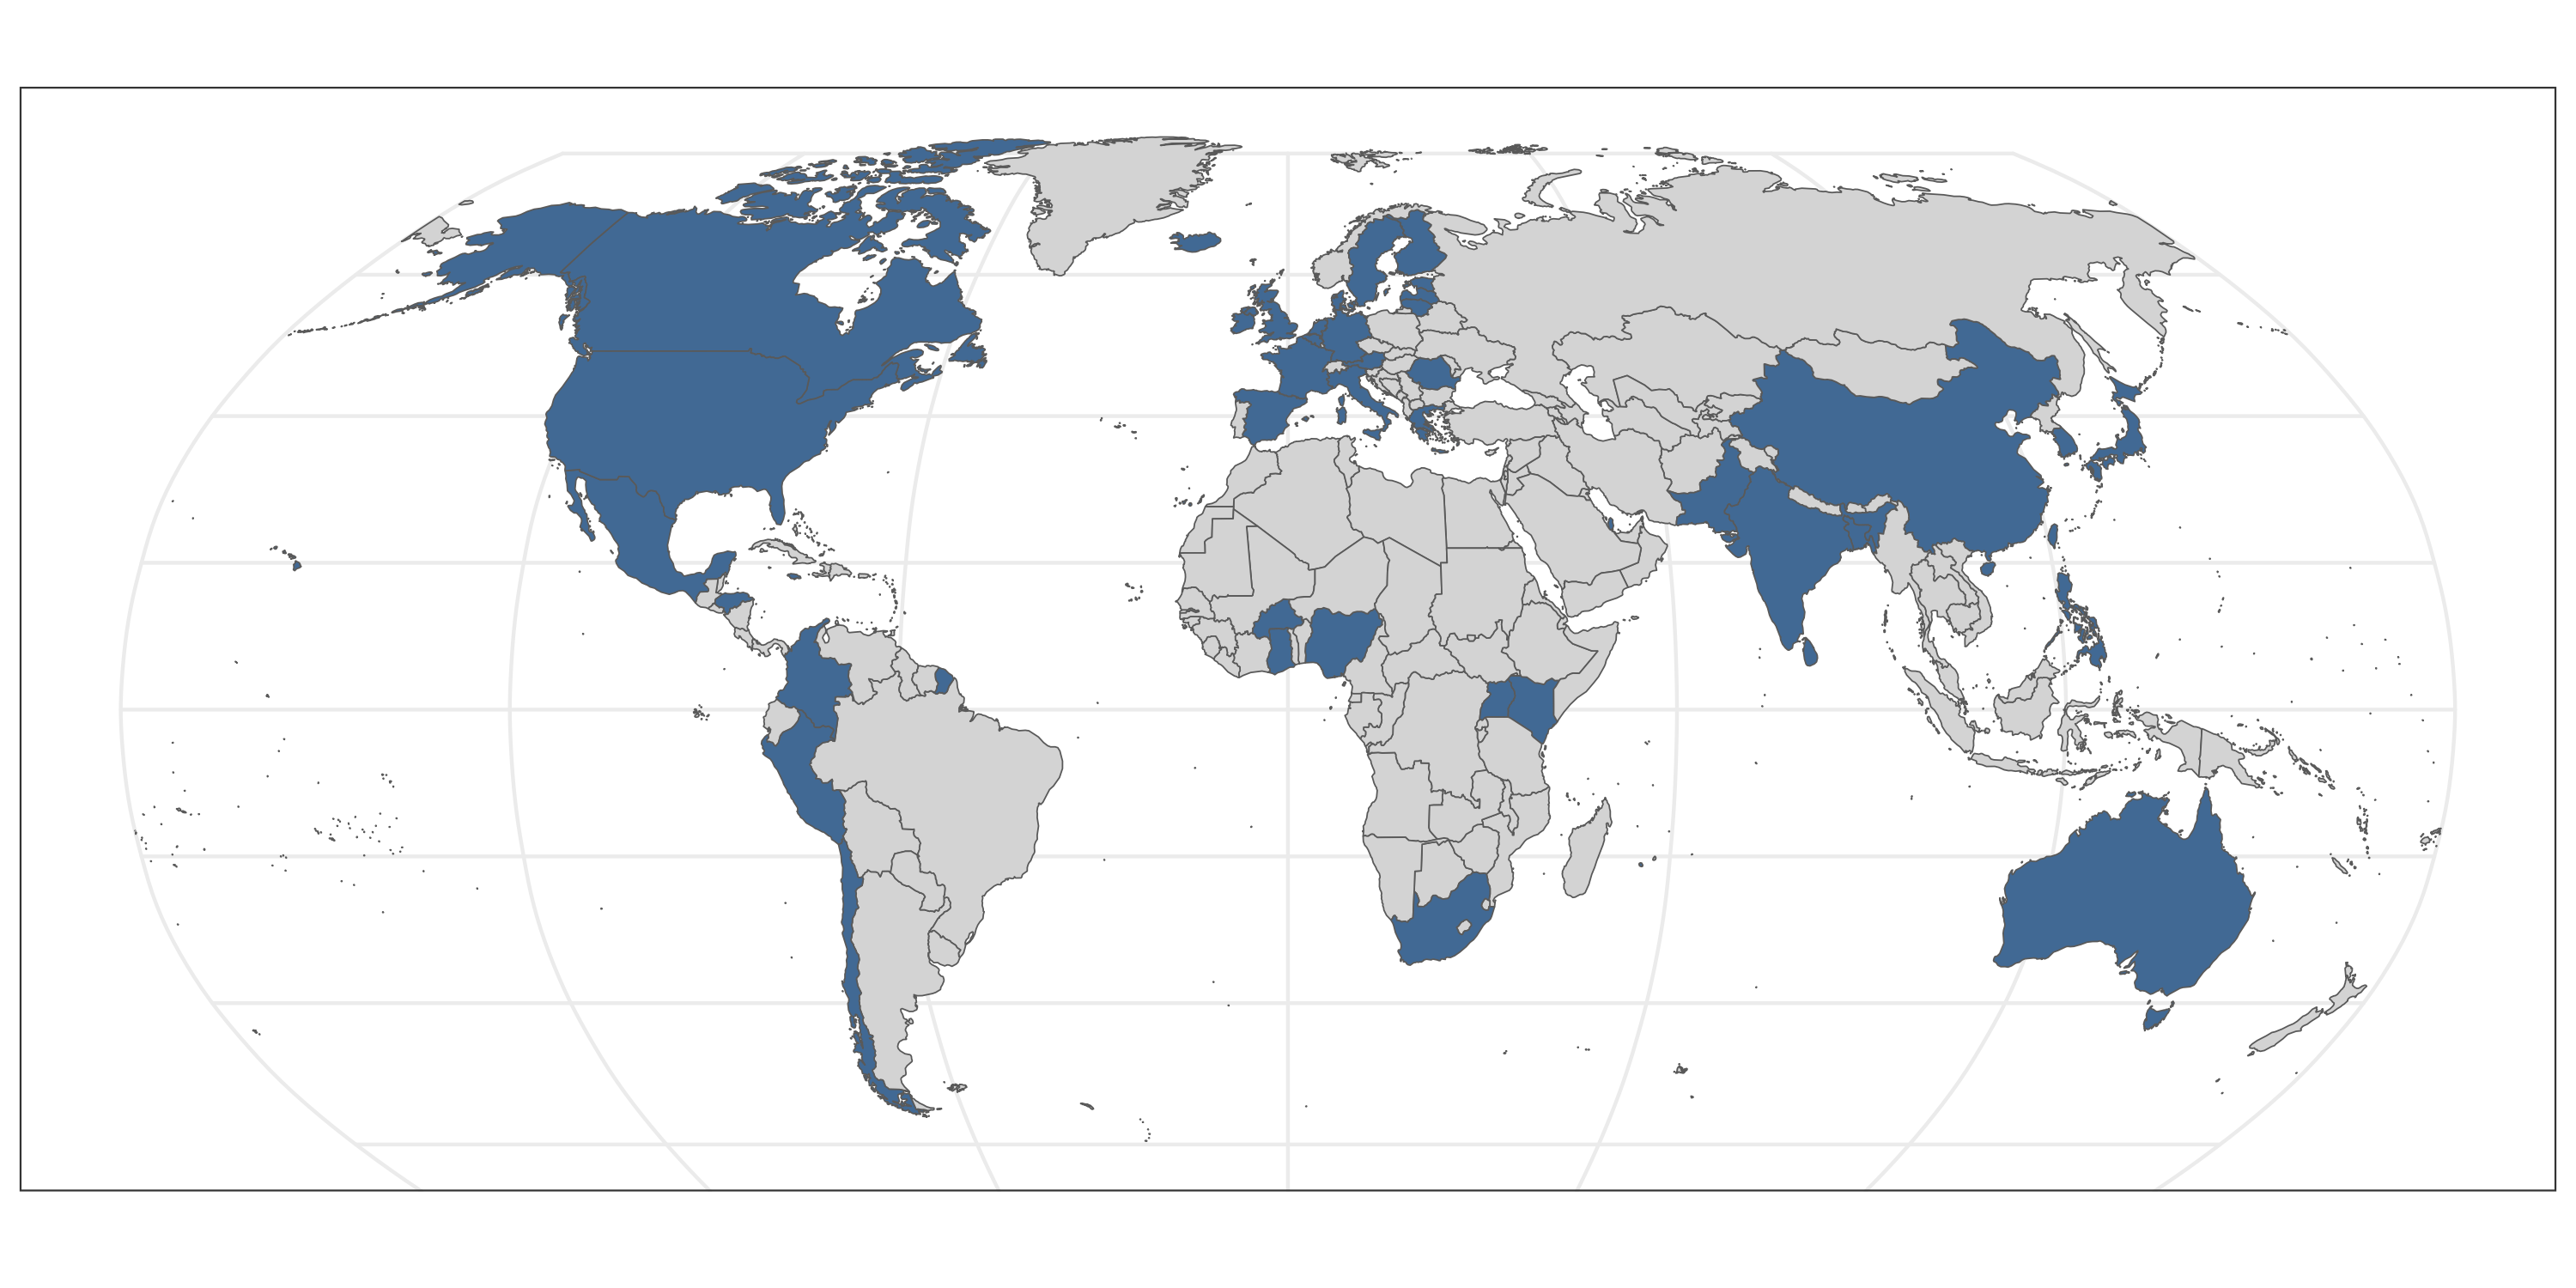 Map of Earth with country boundaries marked. Blue shading indicates countries from which participants were recruited across studies, cohorts, and consortia with datasets proposed for use by PRIMED Study Sites.